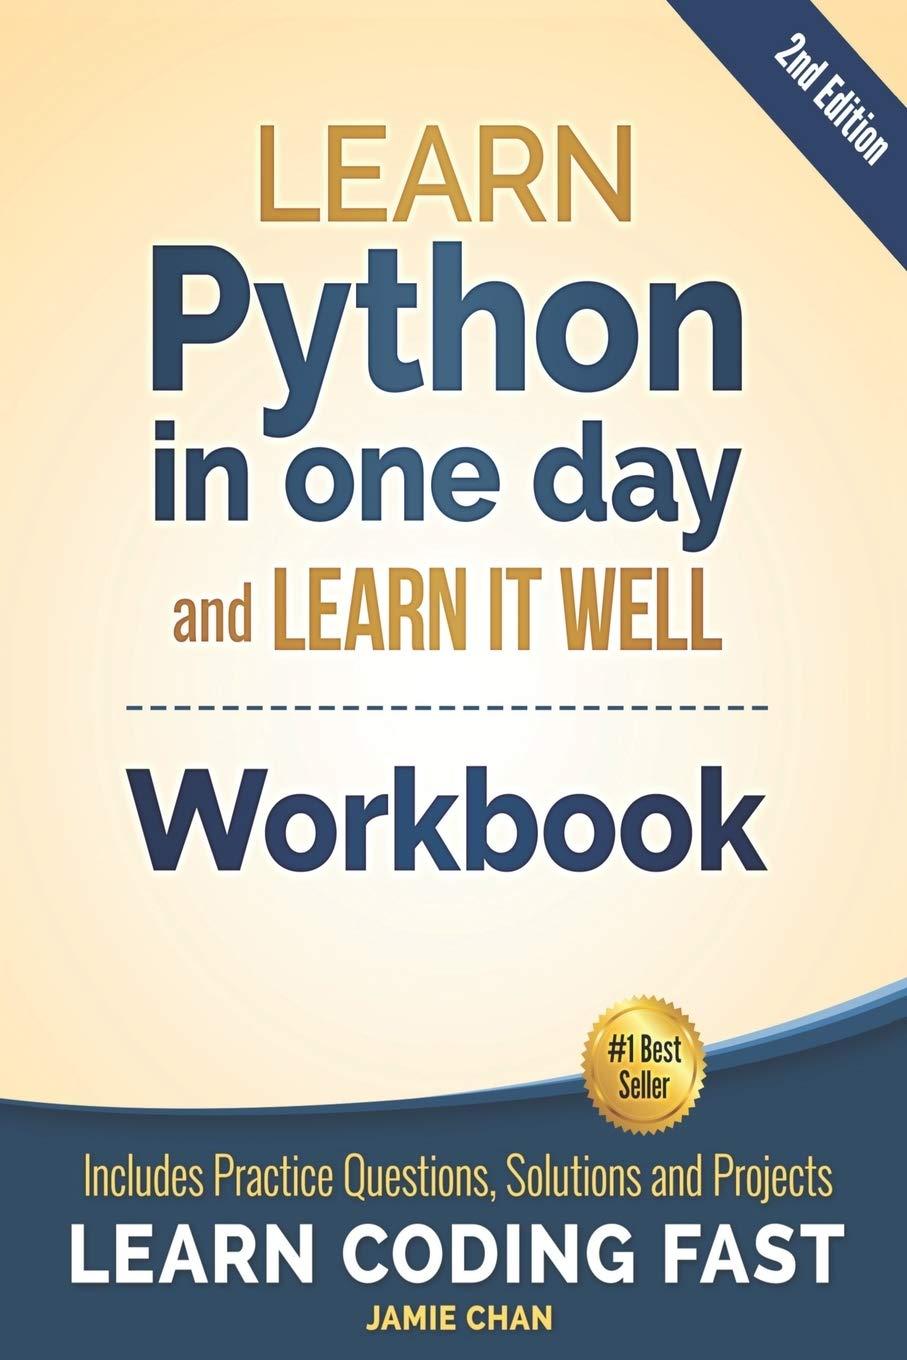 python workbook learn python in one day and learn it well questions solutions and projects learn coding fast